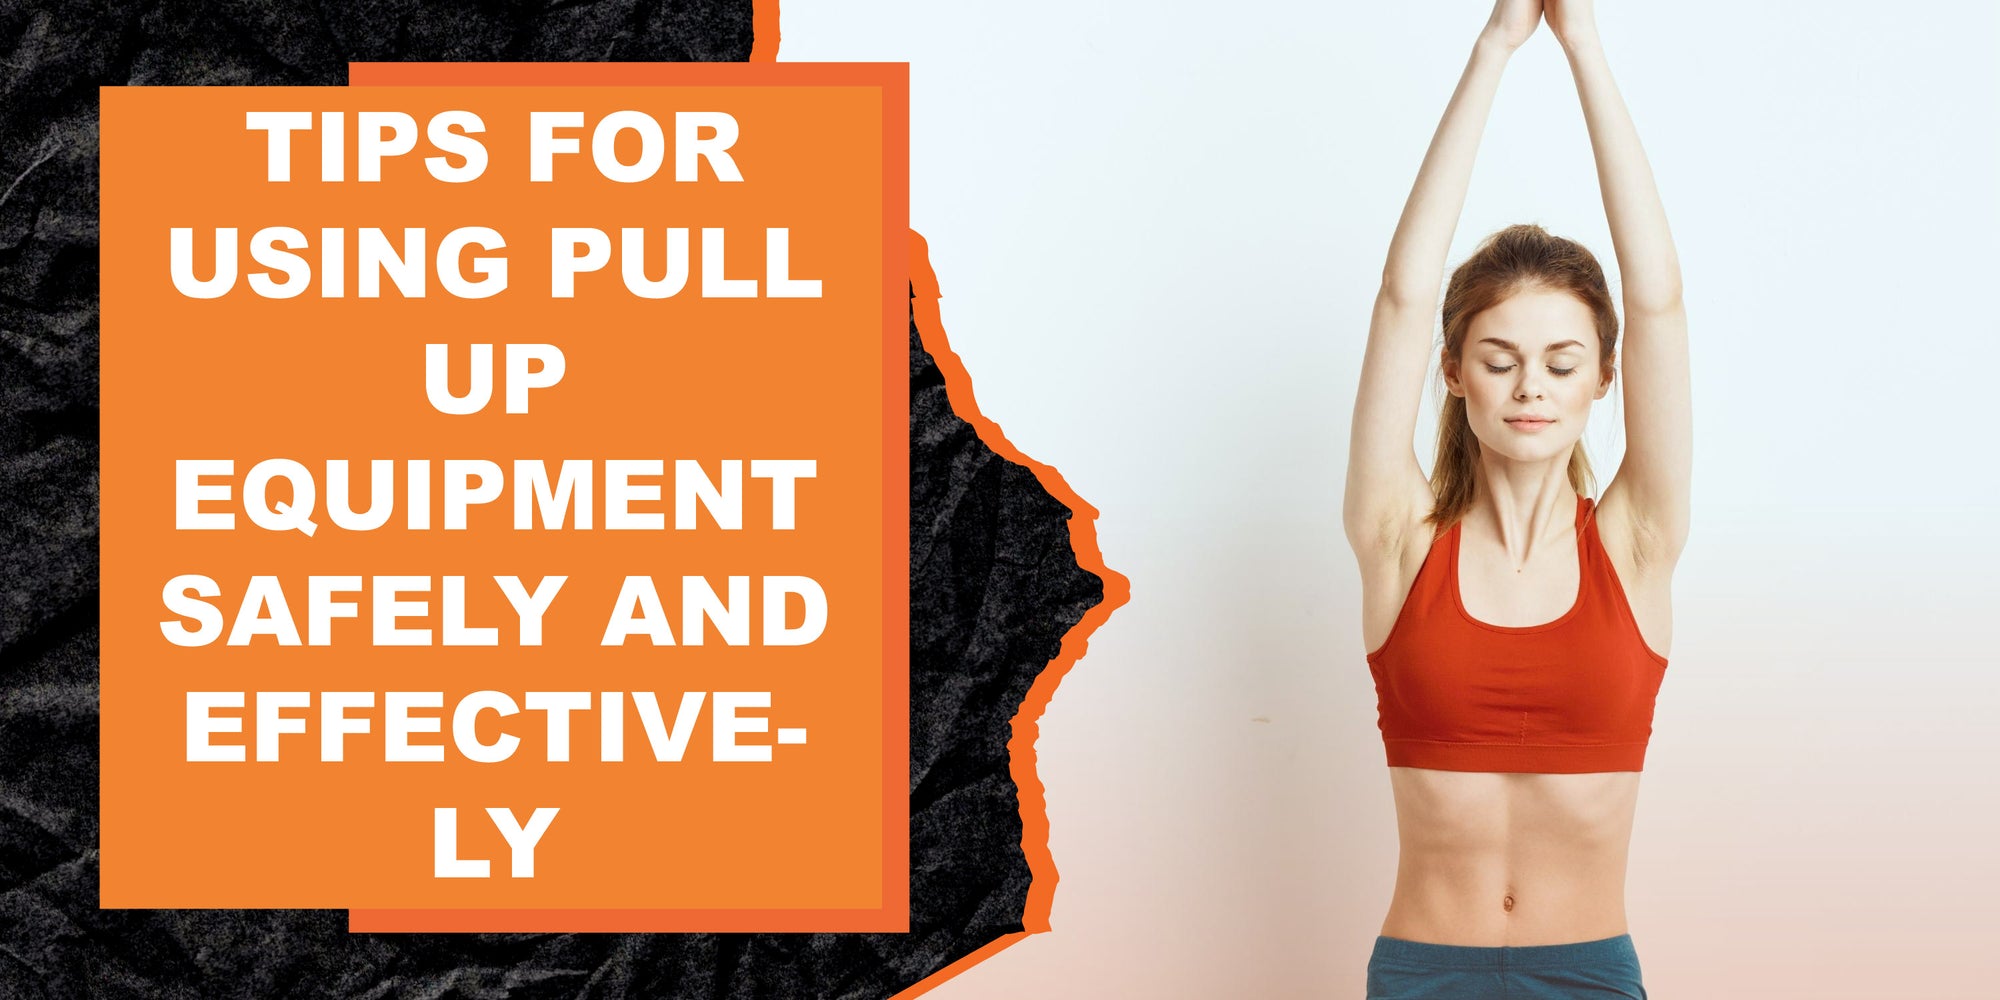 Tips for Using Pull Up Equipment Safely and Effectively